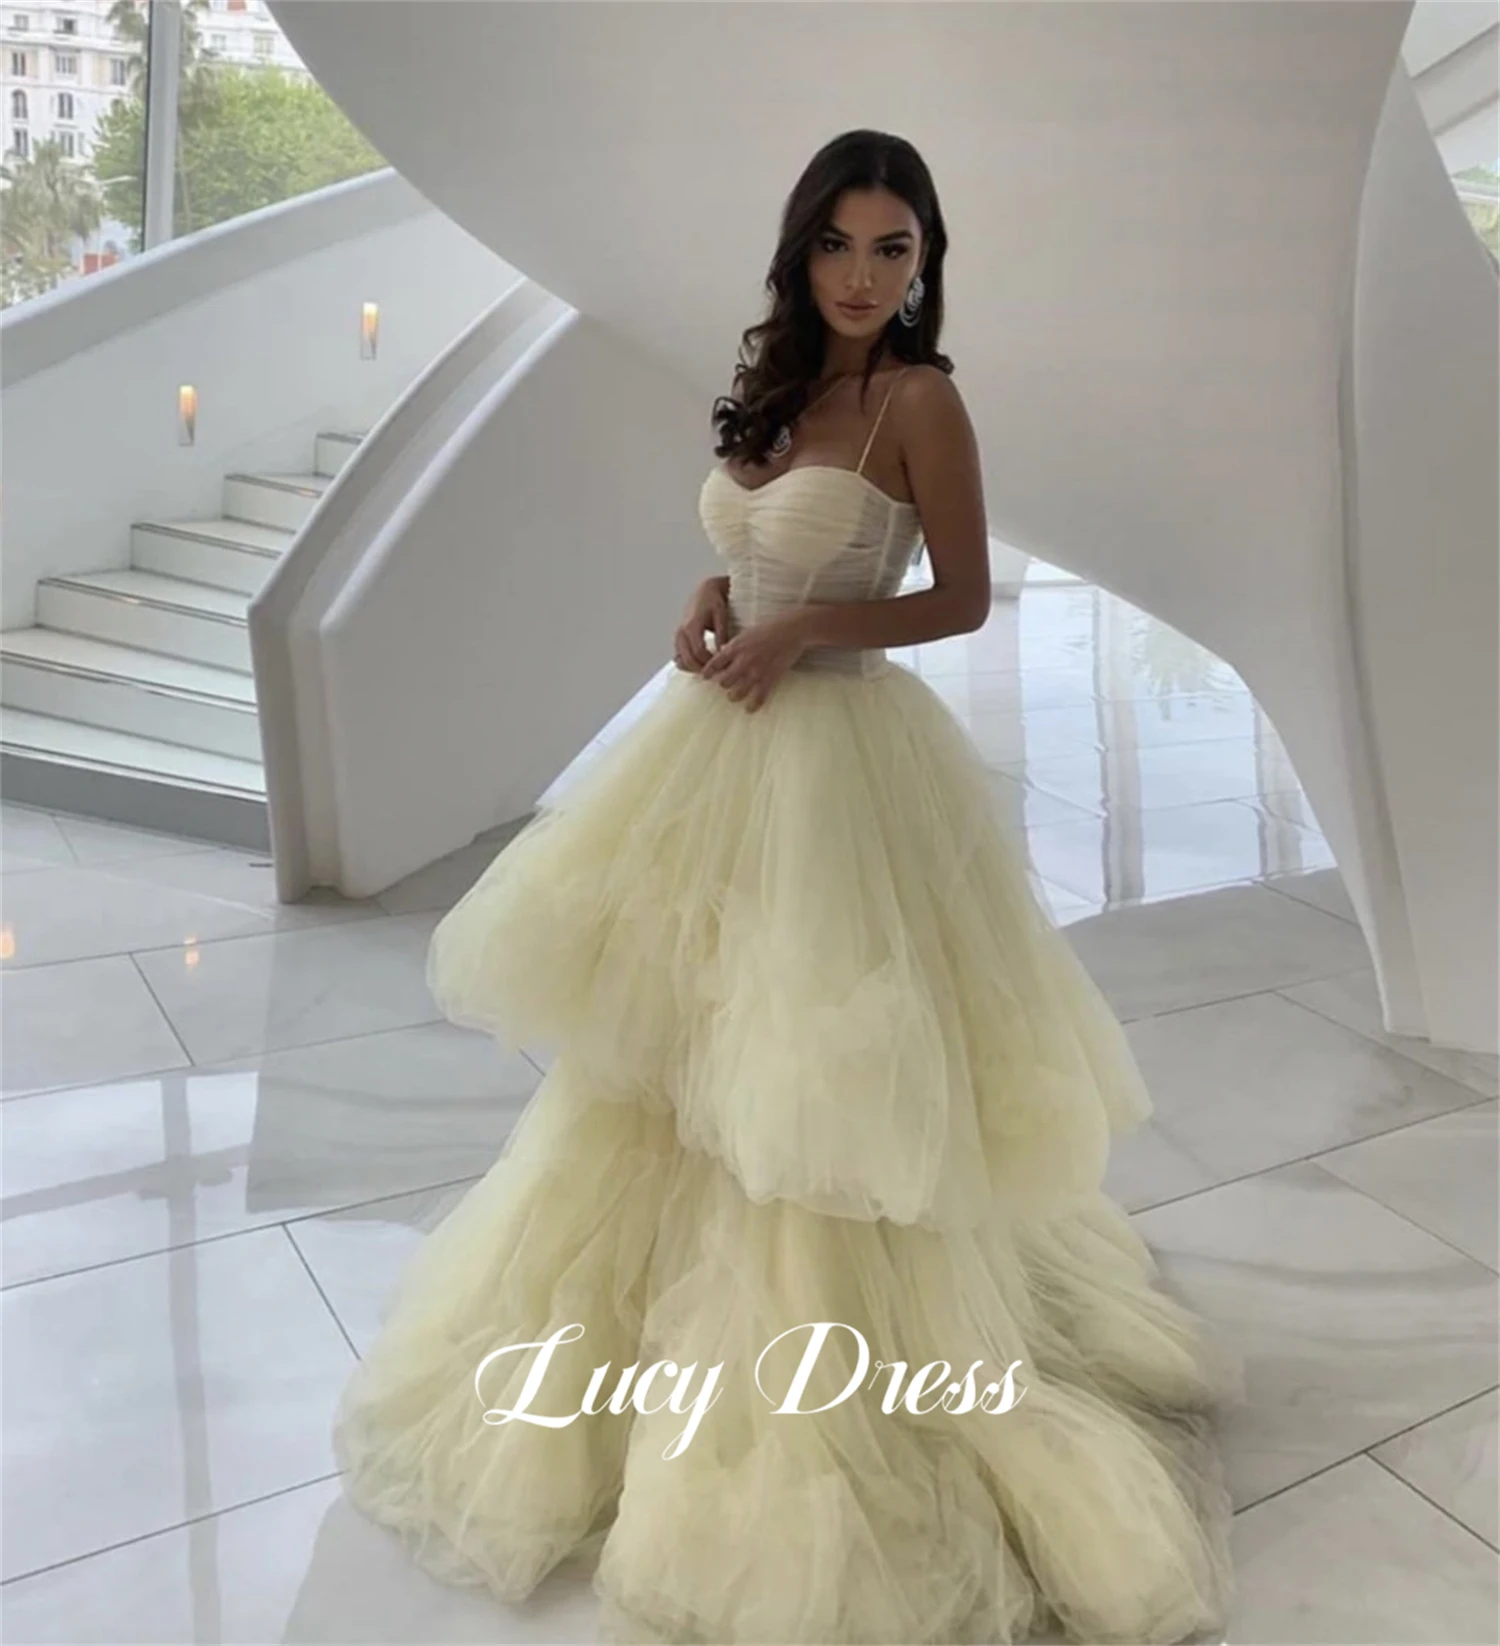 

Lucy Layered White Wedding Party Fluffy Strapless Ball Gown Mesh Dress Long Elegant Evening Dresses for Formal Occasions Prom